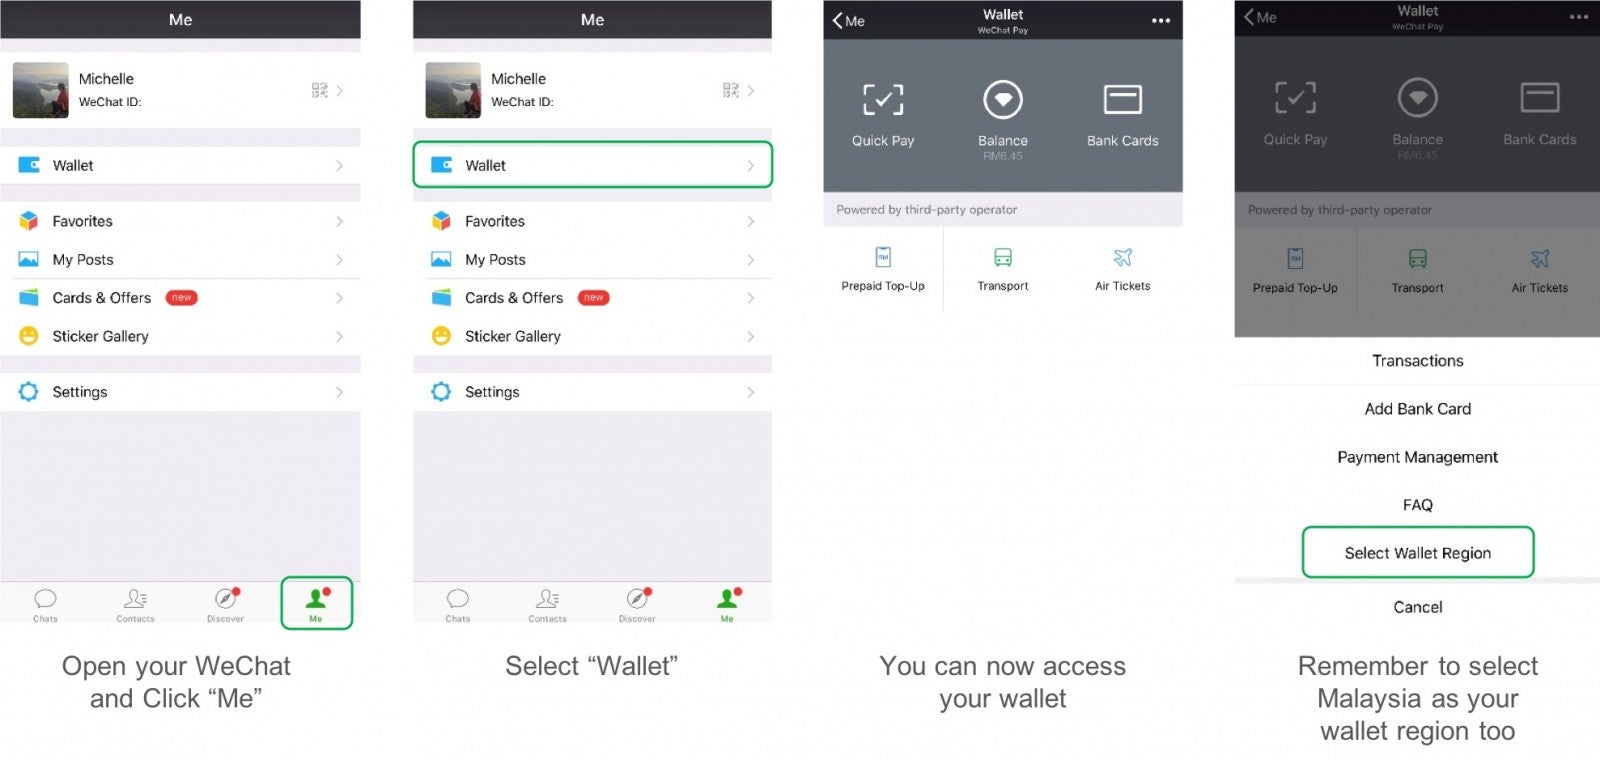 [Test] Here's How M’sians Can Get Up to RM88.88 Free Money by Just Using This ONE App! - WORLD OF BUZZ 1